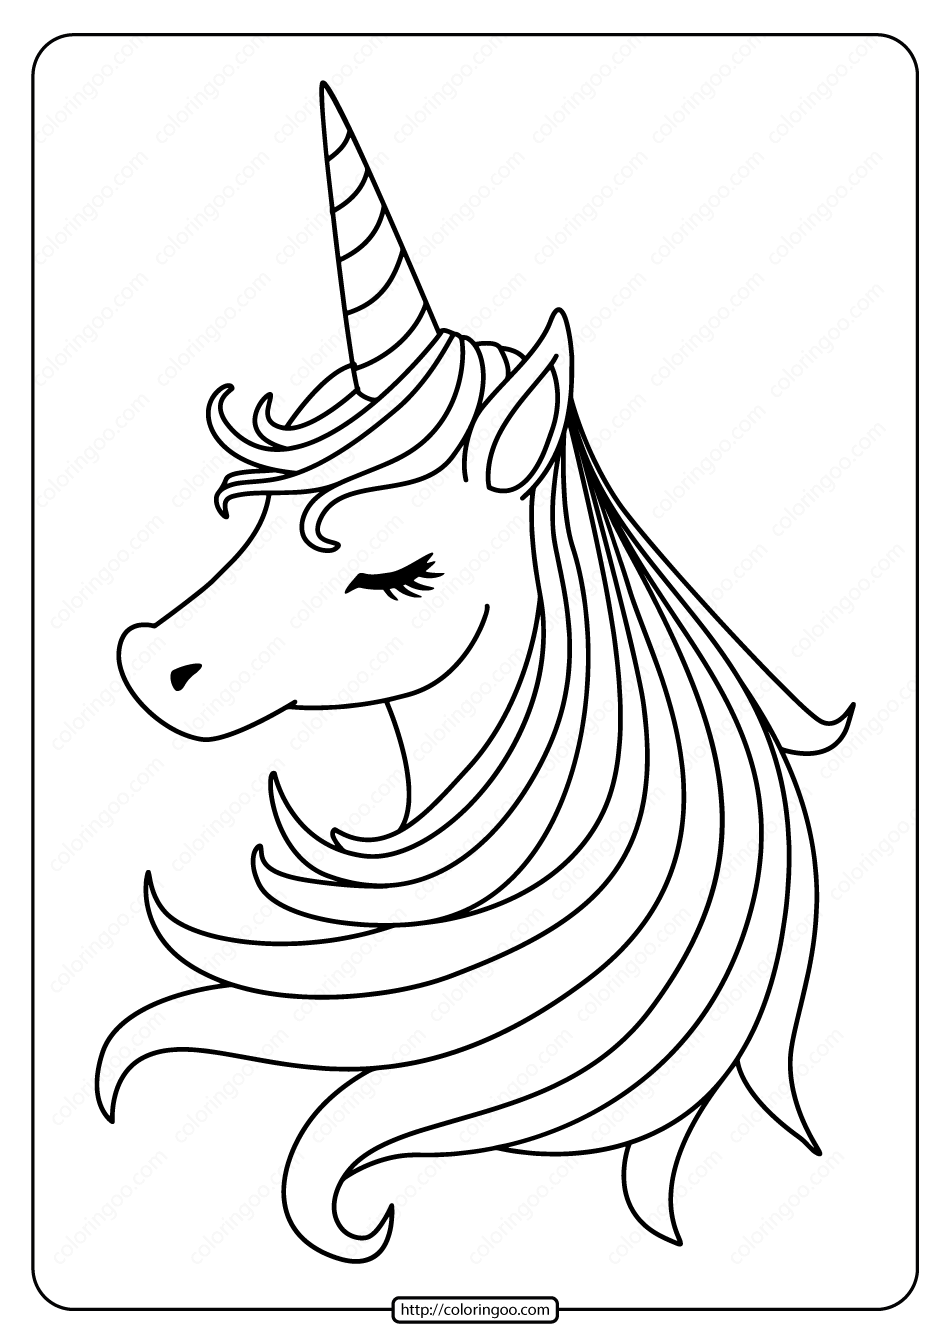 Free Printable Sleeping Unicorn Coloring Pages For Kids Of All Ages 